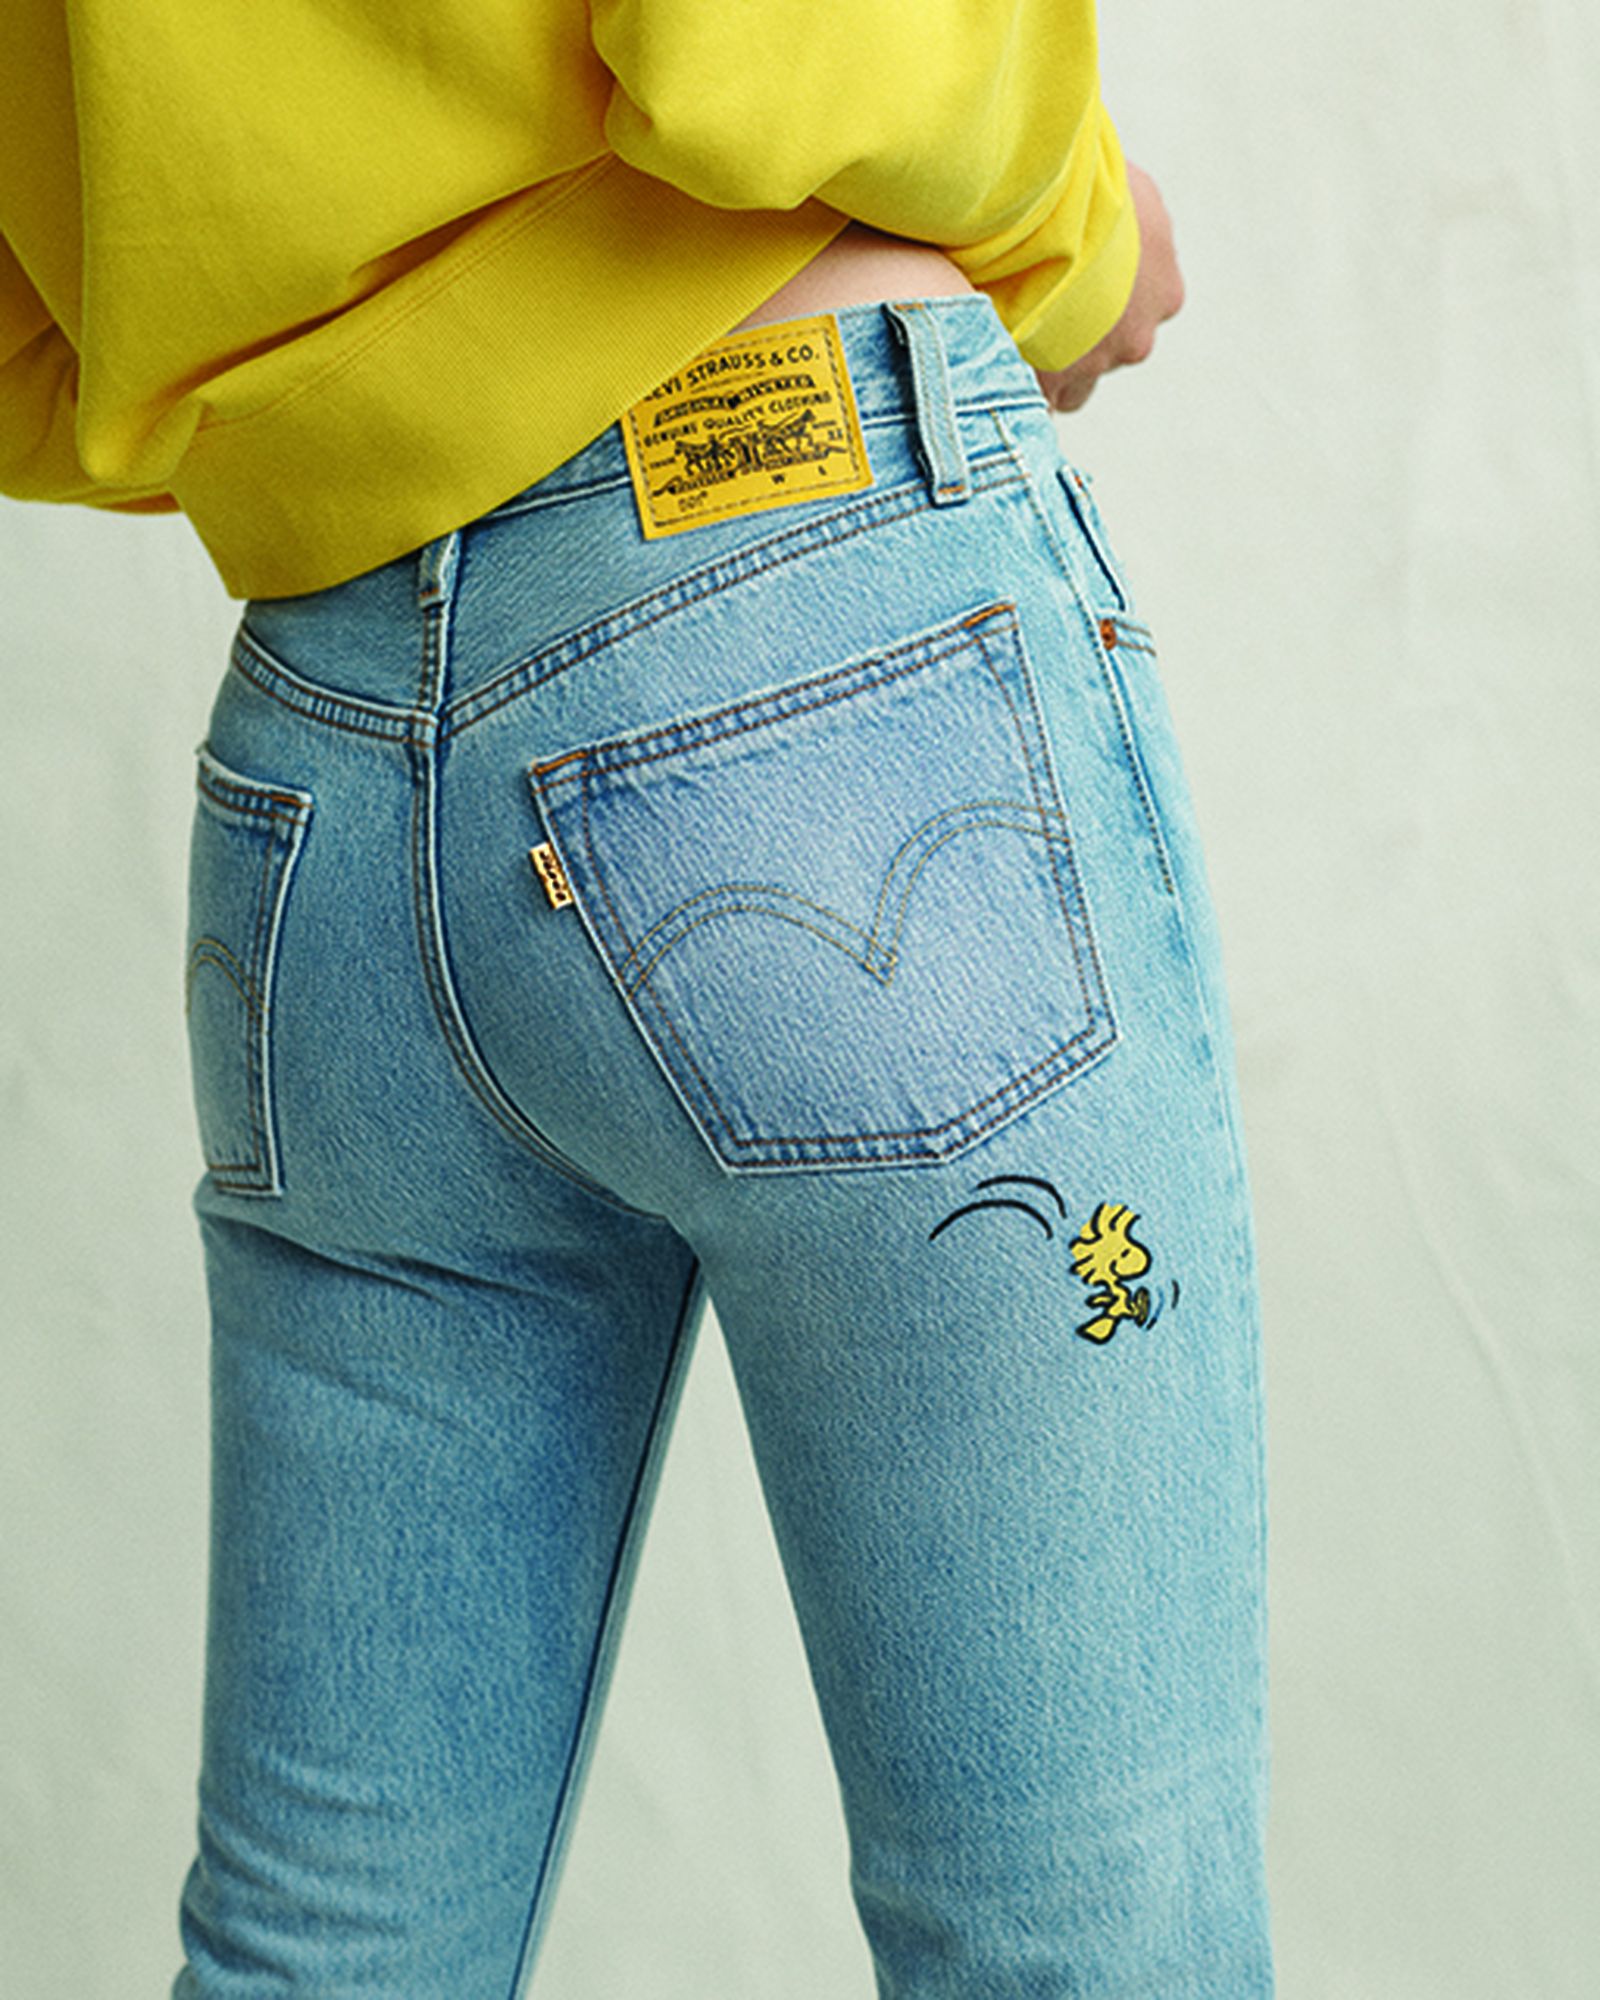 Levis Jeans Snoopy | lupon.gov.ph